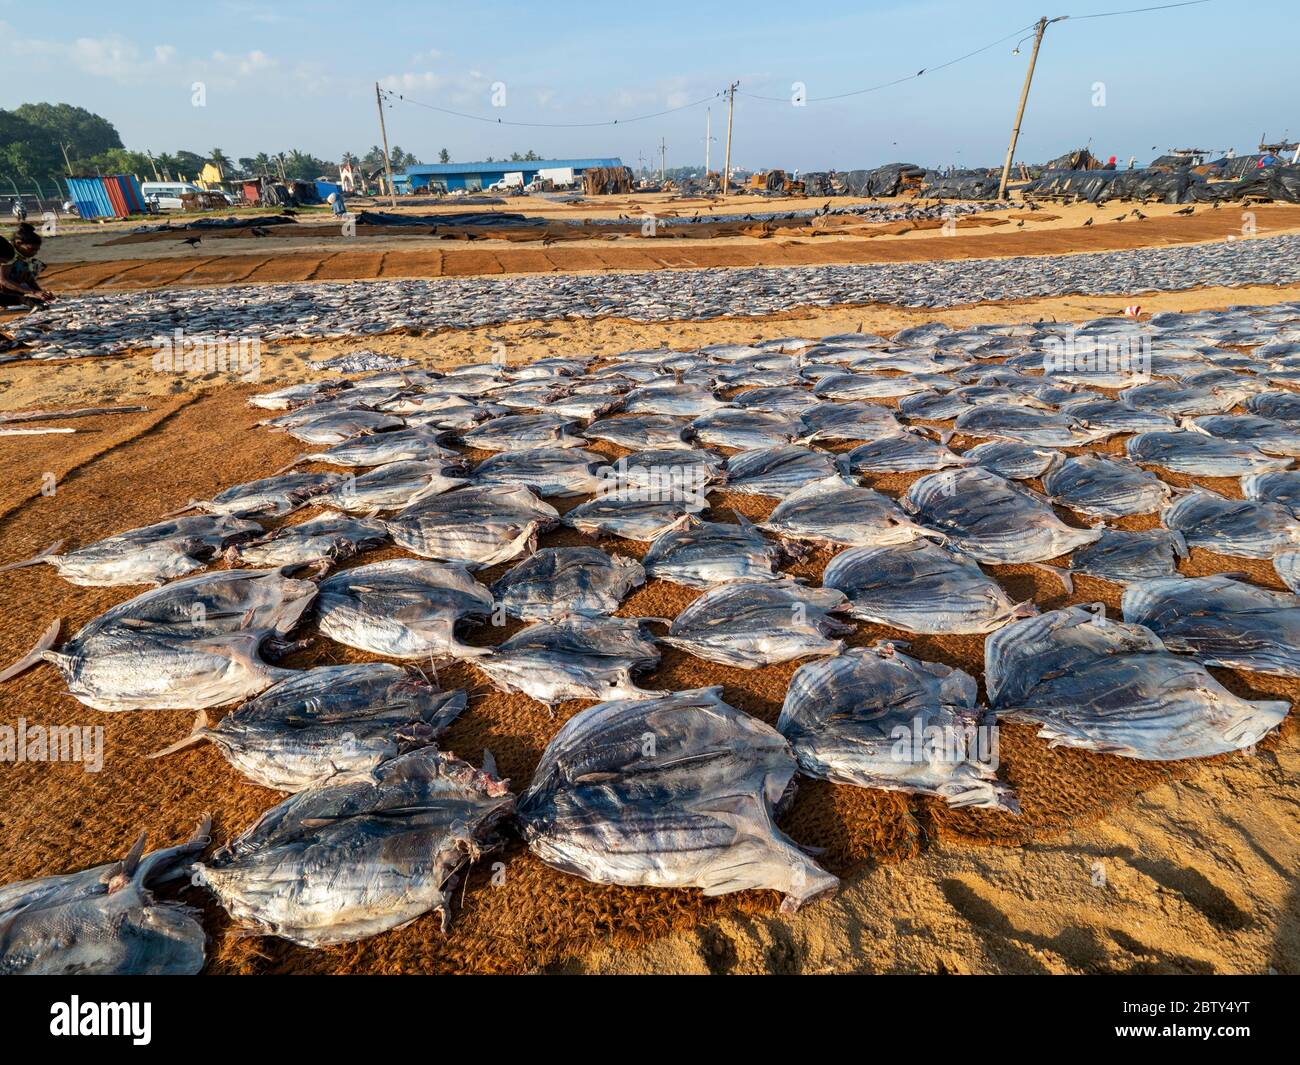 Cleaned fish layed out and drying in the sun on woven mats at the Negombo fish market, Negombo, Sri Lanka, Asia Stock Photo